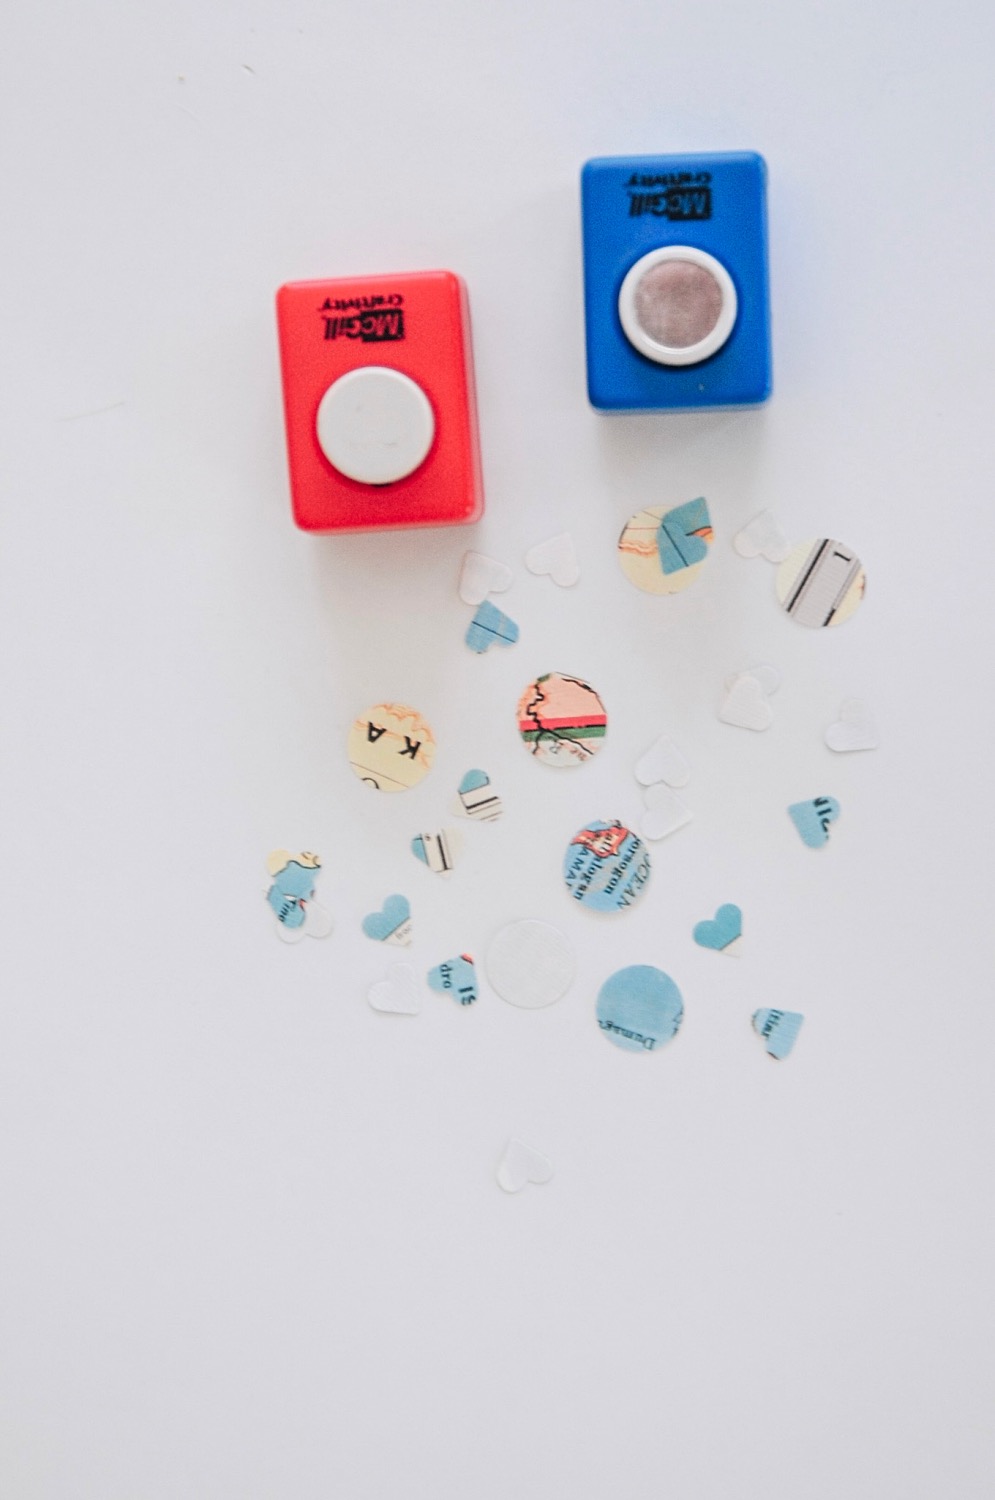 punched handmade confetti from map paper